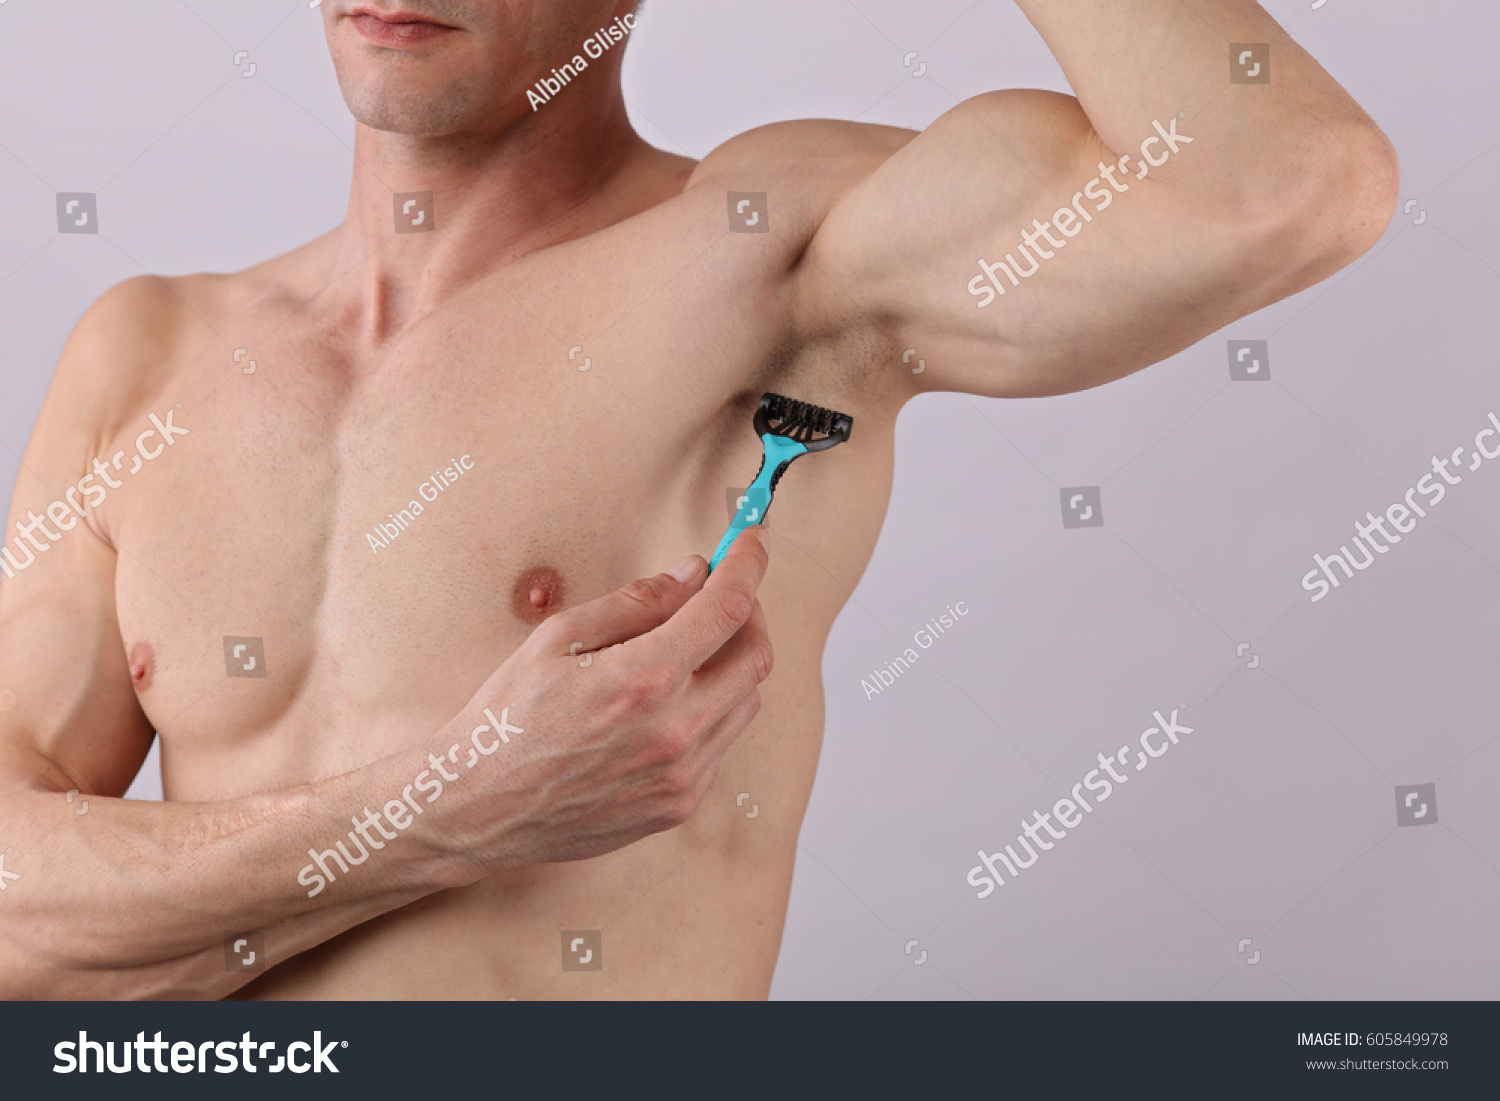 Male Body Hair Removal Attractive Muscular Stock Photo 605849978